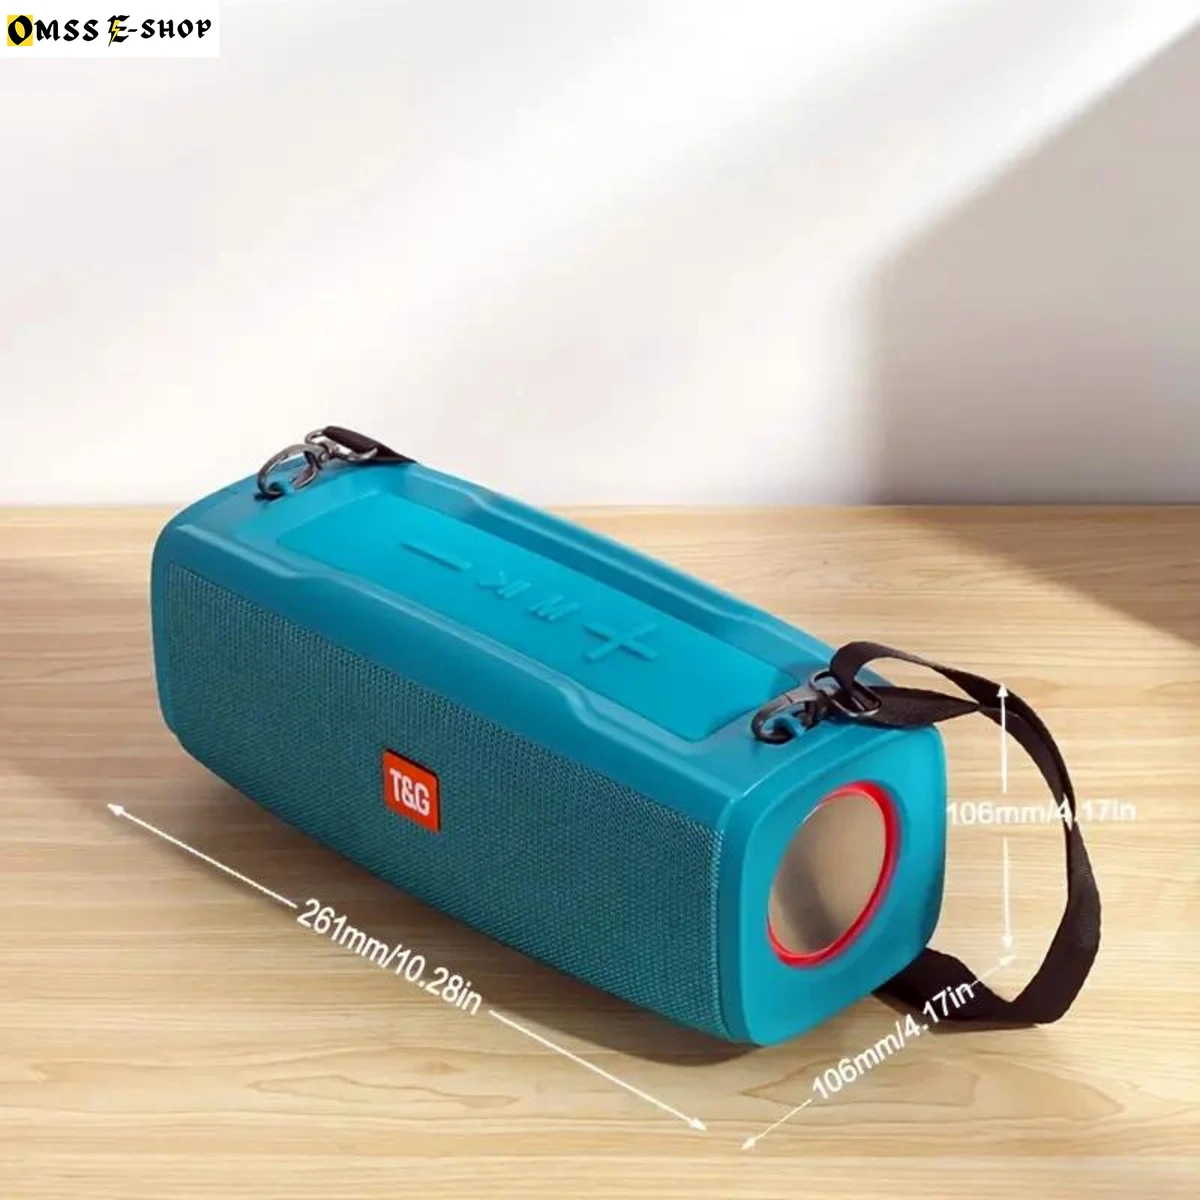 TG-624 Portable Wireless Bluetooth Speaker With Dual Diaphragm, Waterproof Plug-in USB Voice Call Speaker RP-1300DH-RE